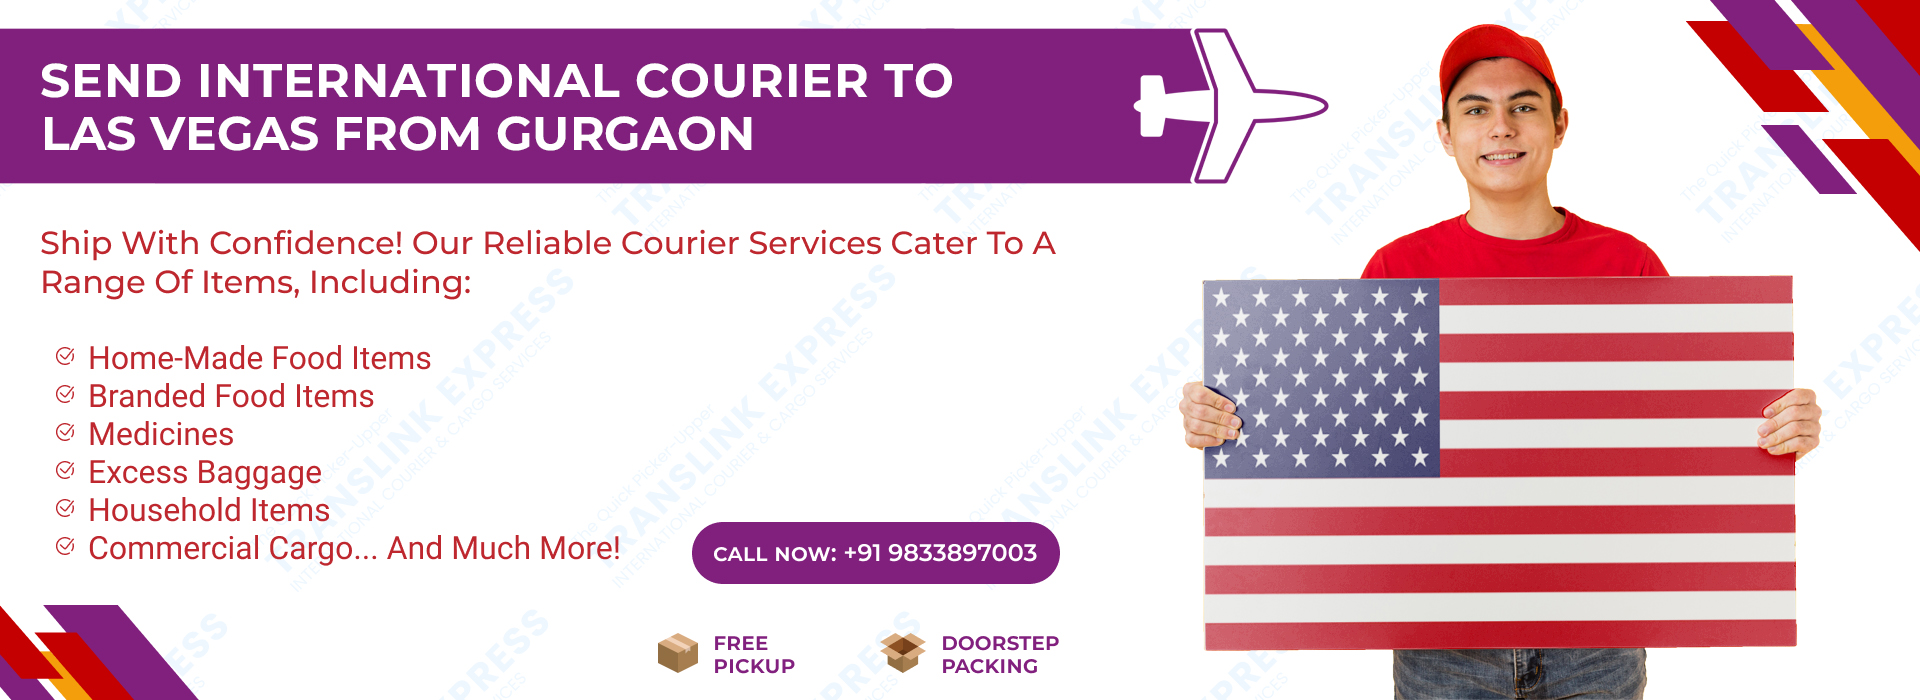 Courier to Las Vegas From Gurgaon